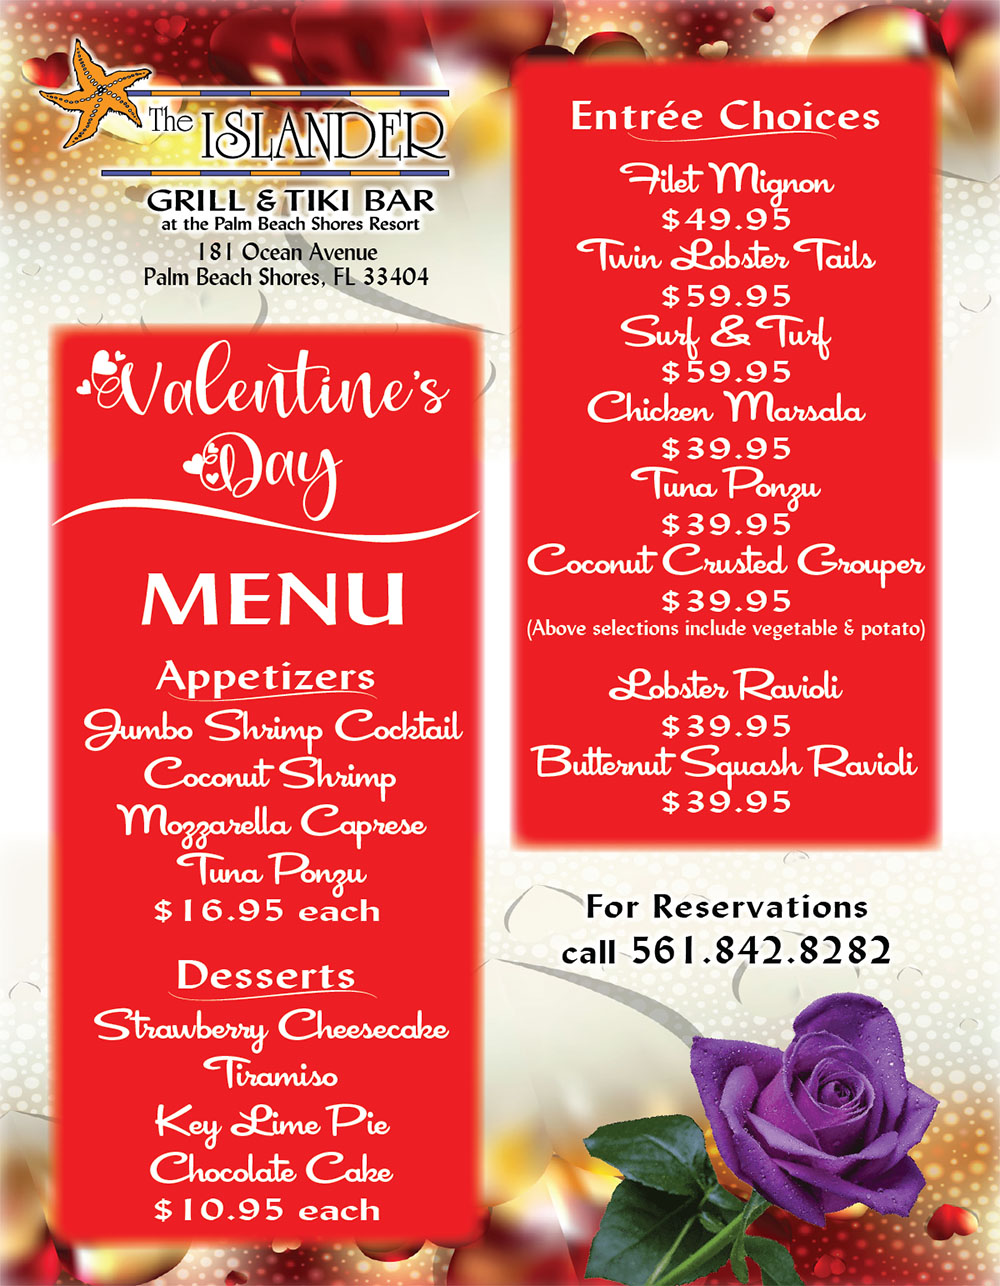 Celebrate Valentines Day at The Islander Grill and Tiki Bar